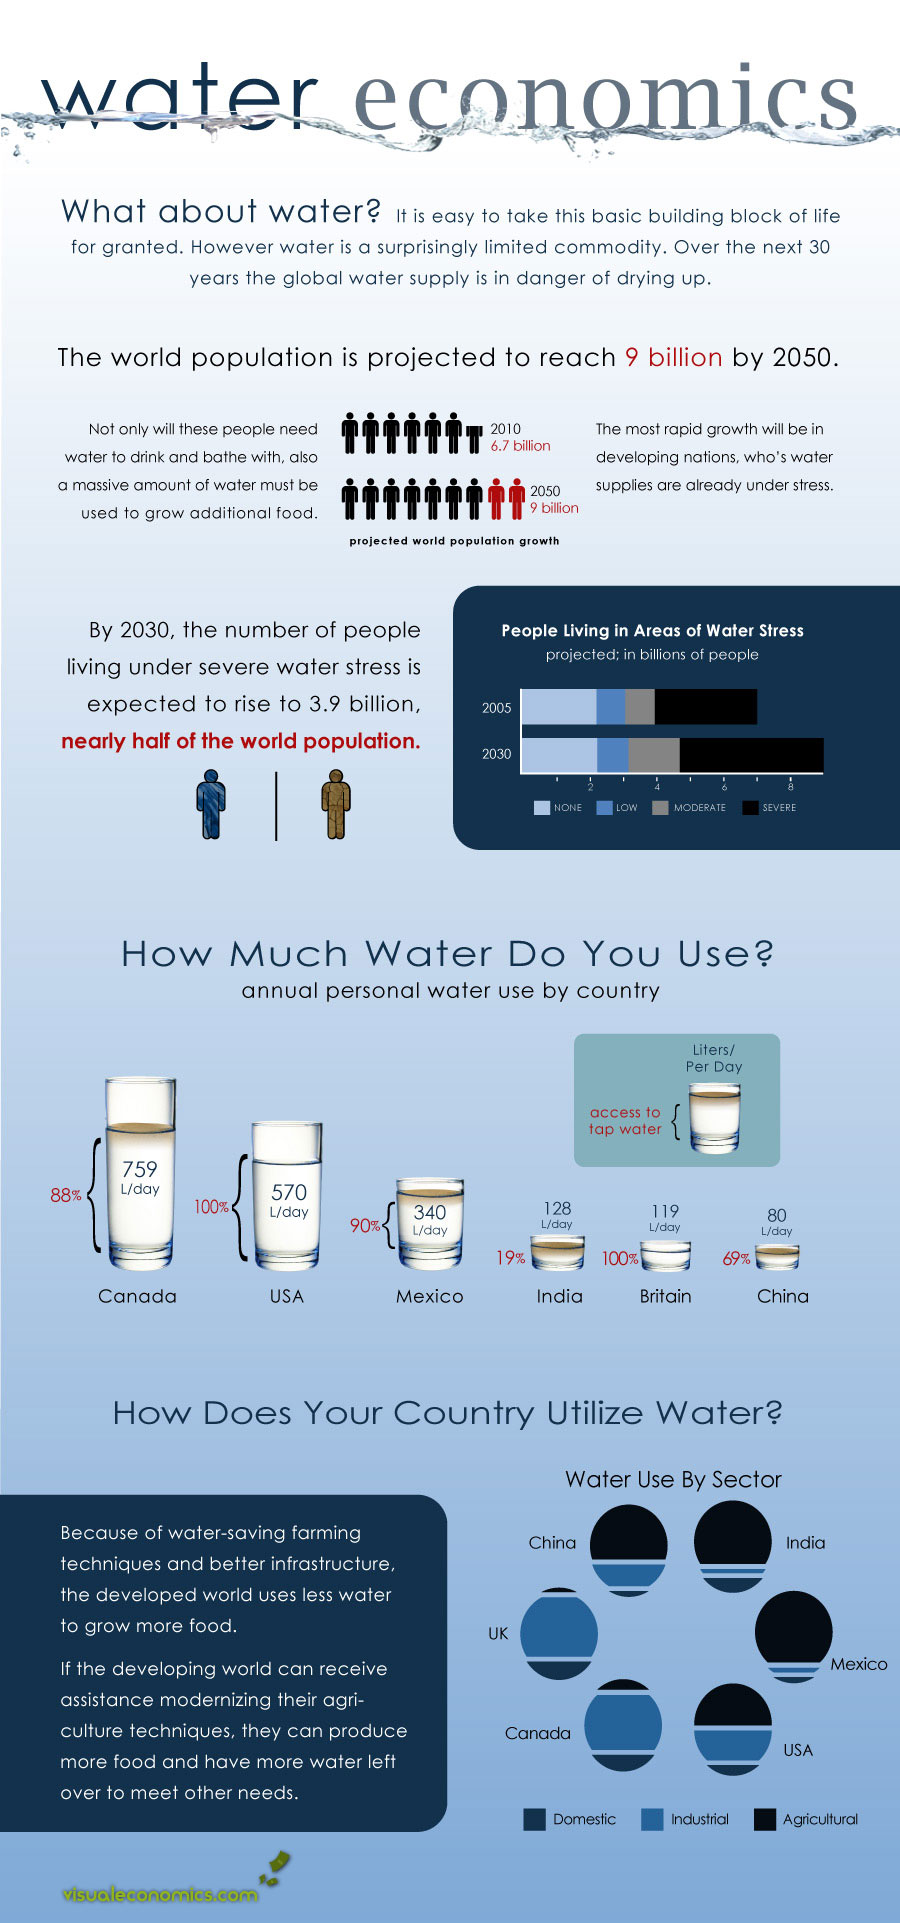 water consumption forms a nice pareto